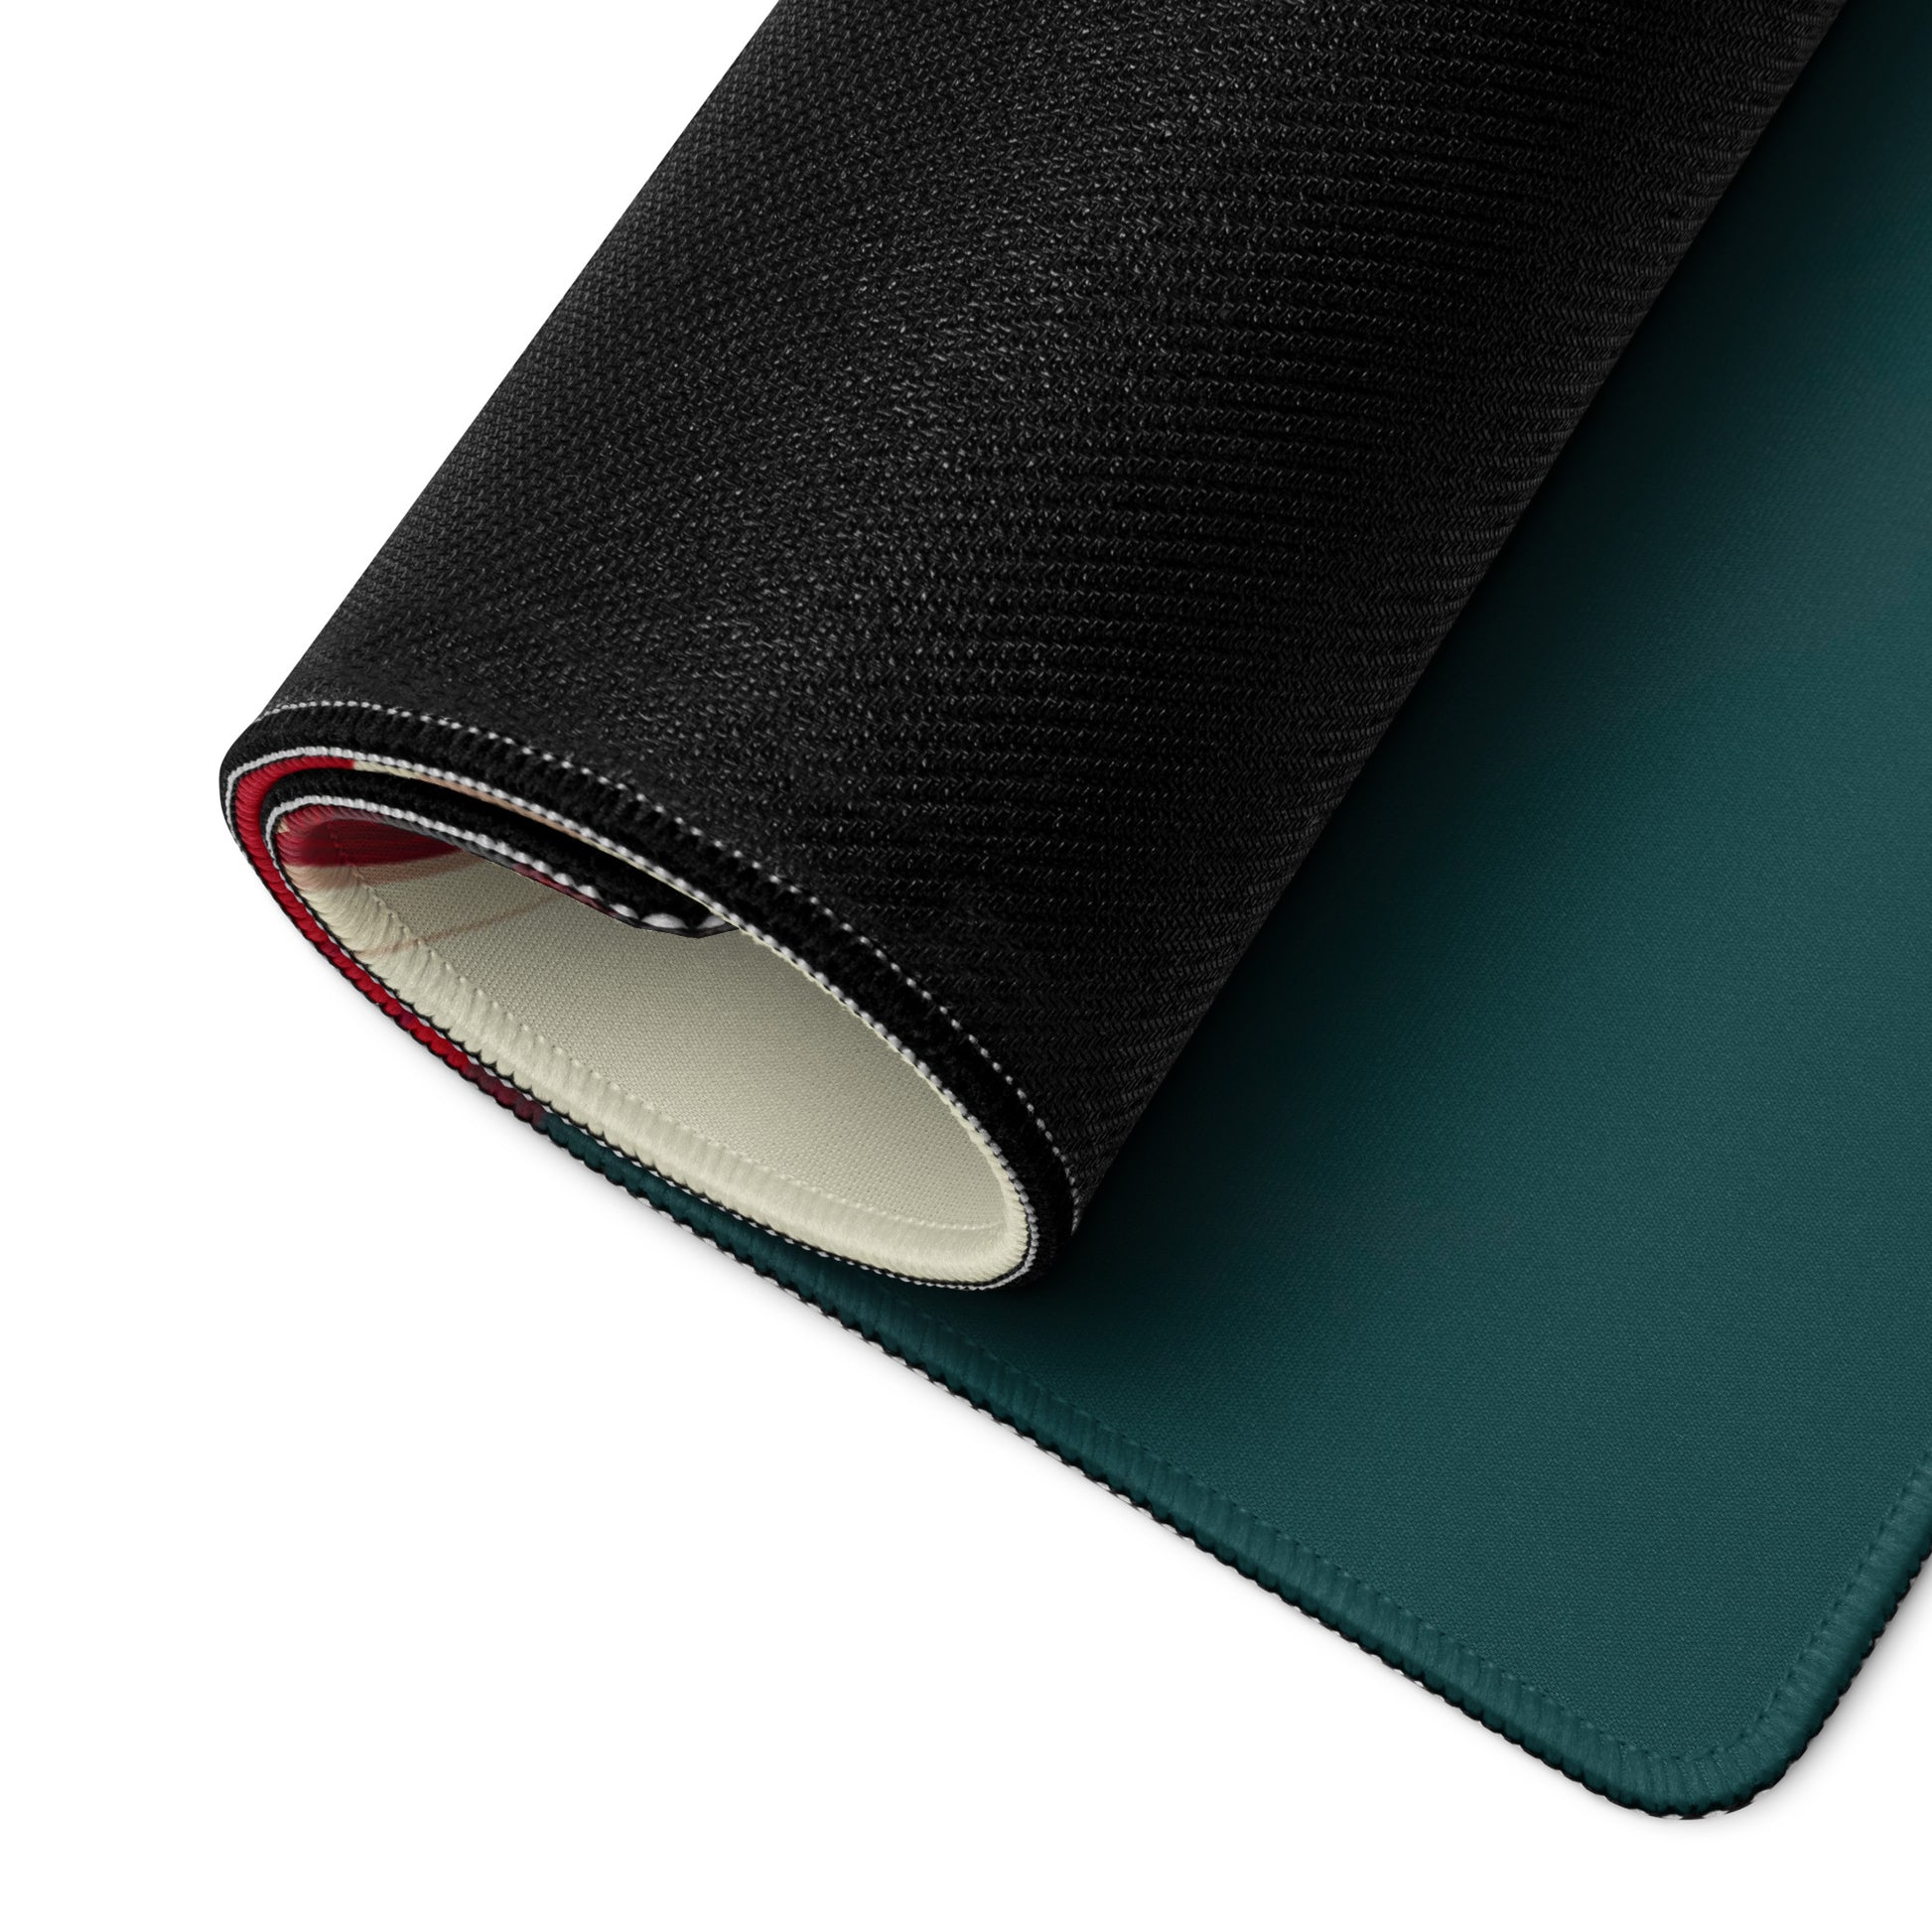 A 36" x 18" teal, red, and white desk pad with a formula one car on the right rolled up.